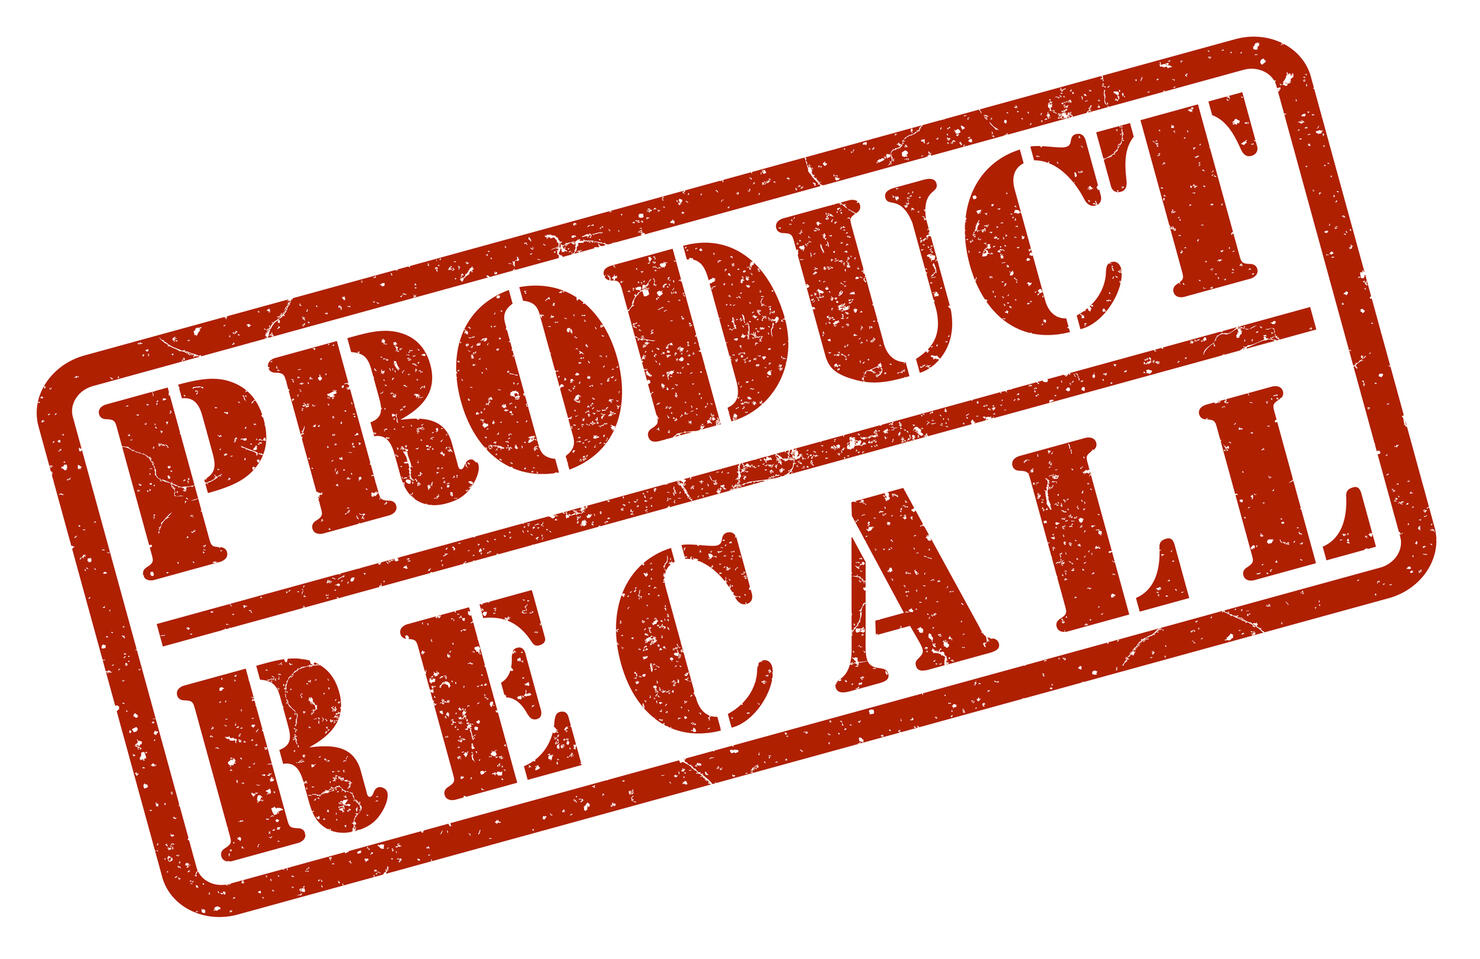 red product recall rubber stamp print on white background vector illustration